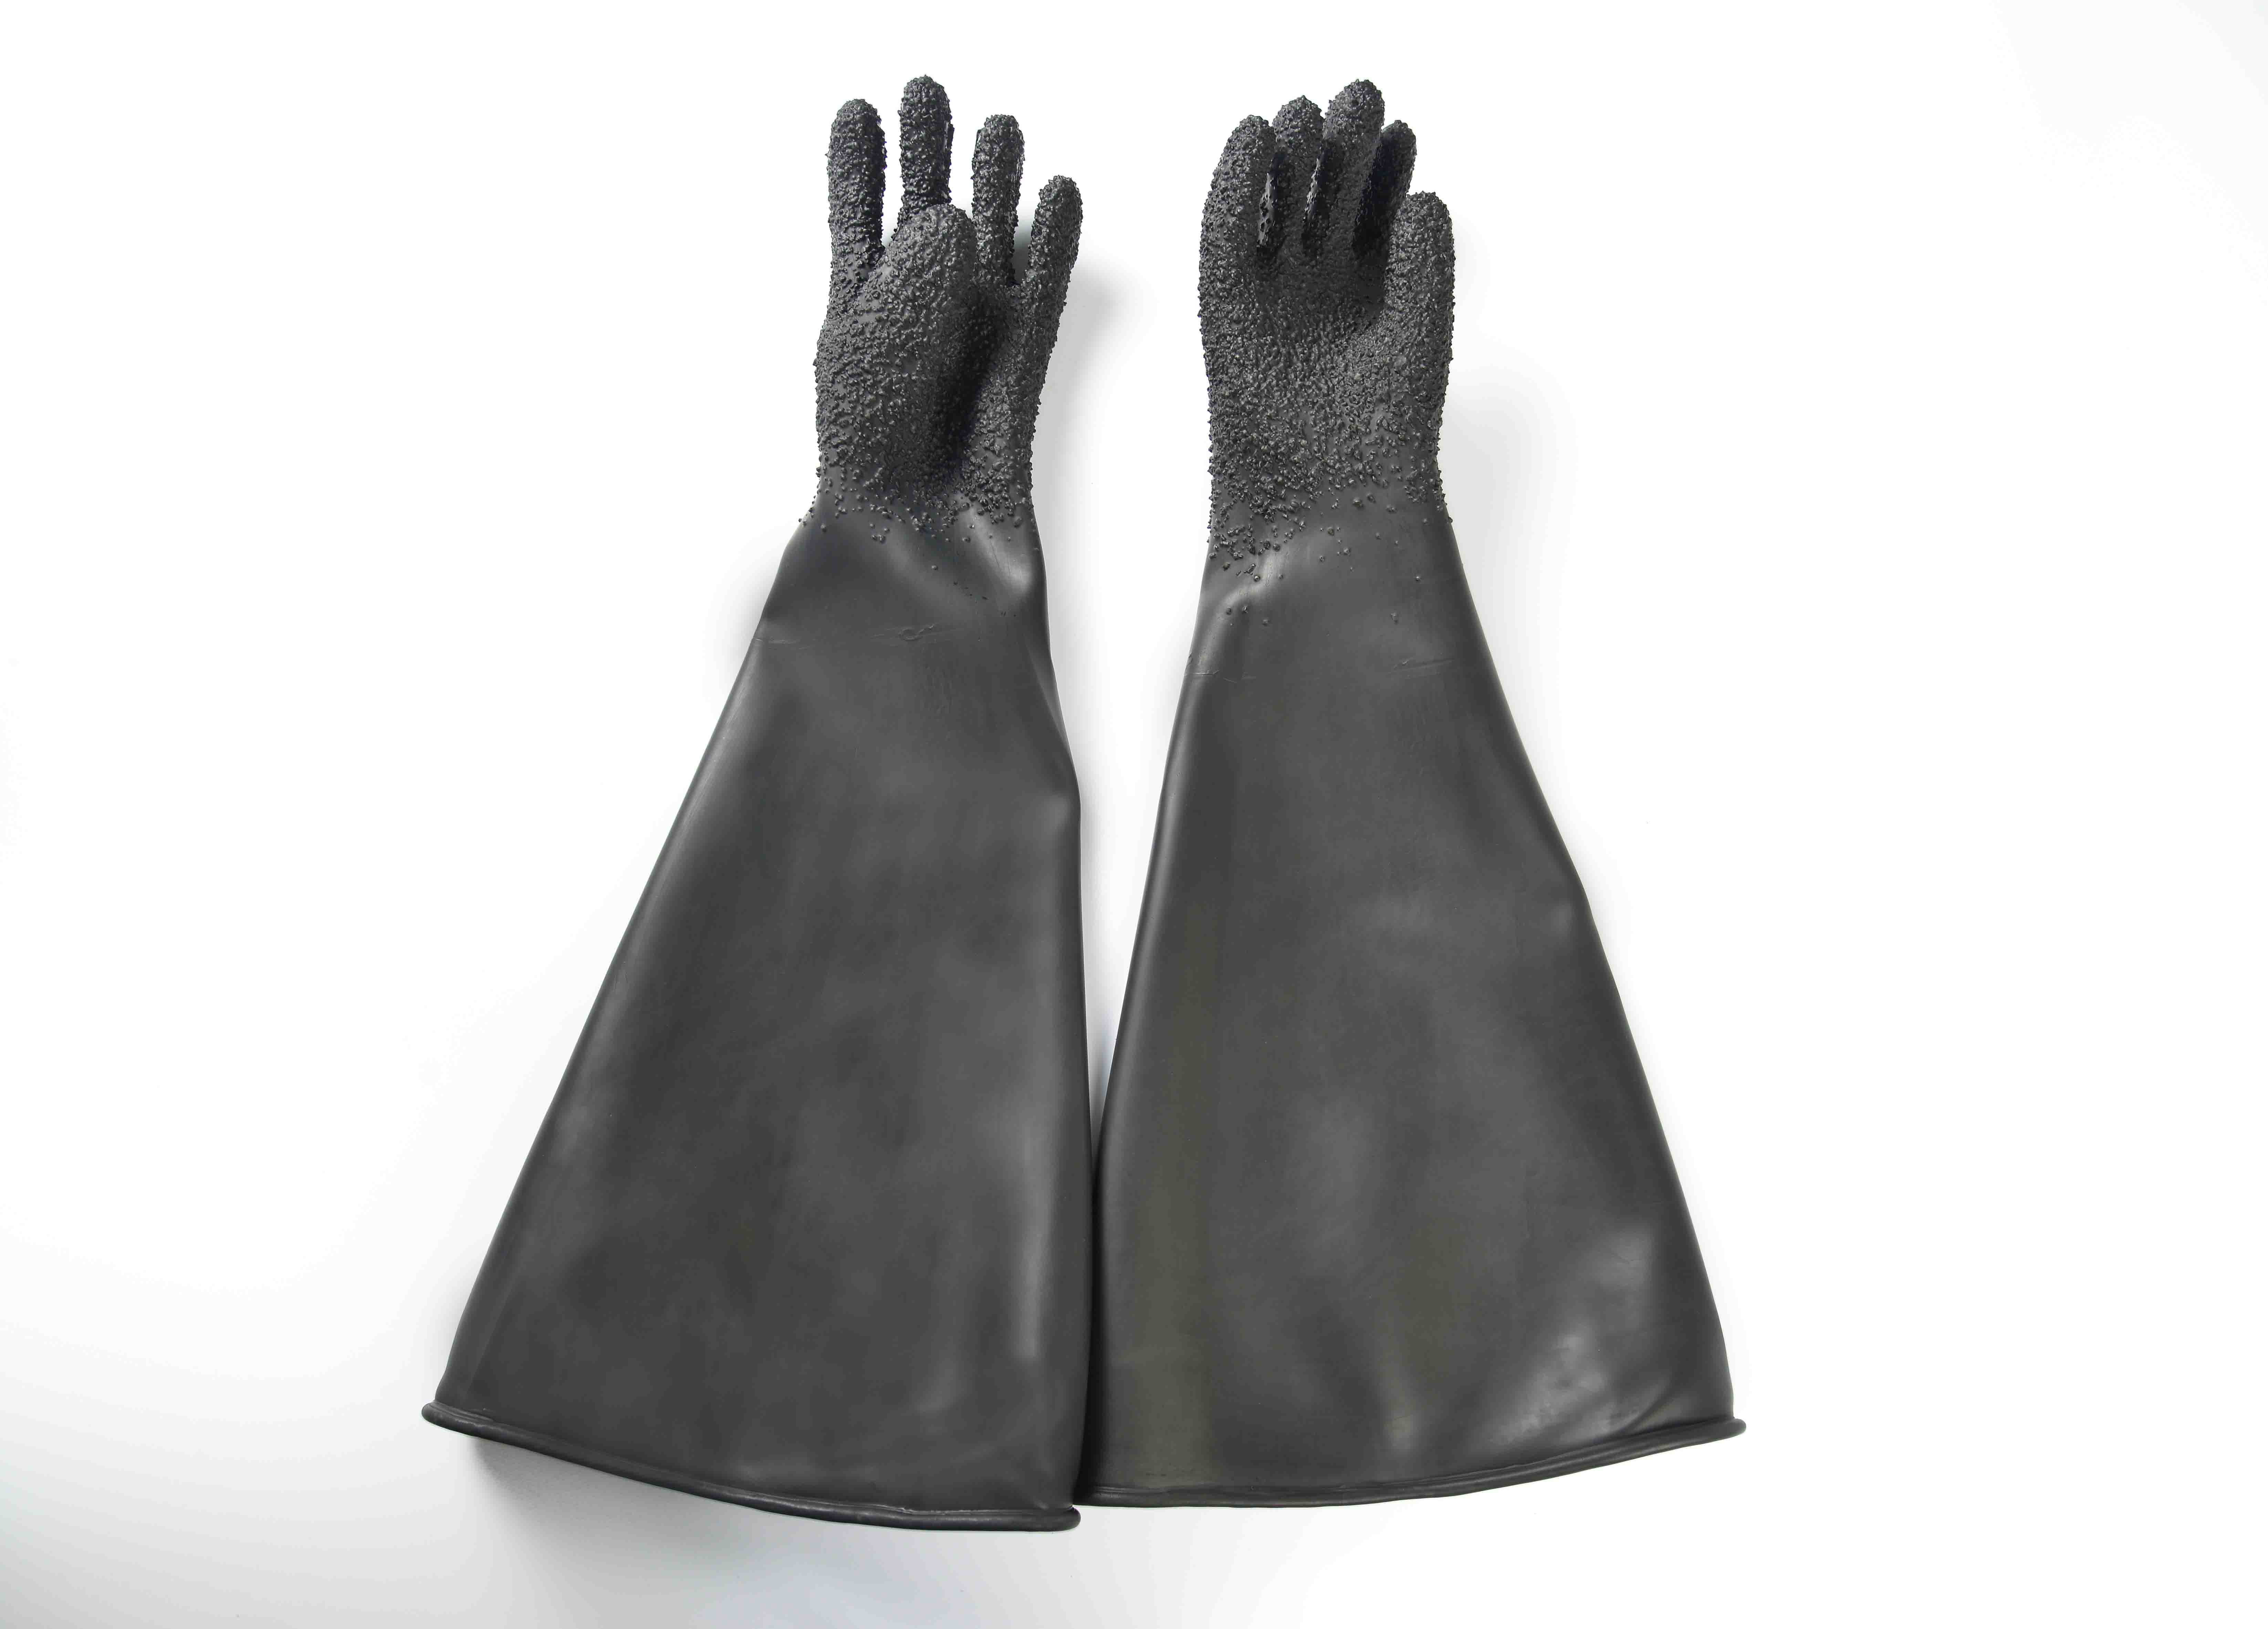 Good Quality 26″ Industrial rubber glove-Granule finish in Iceland